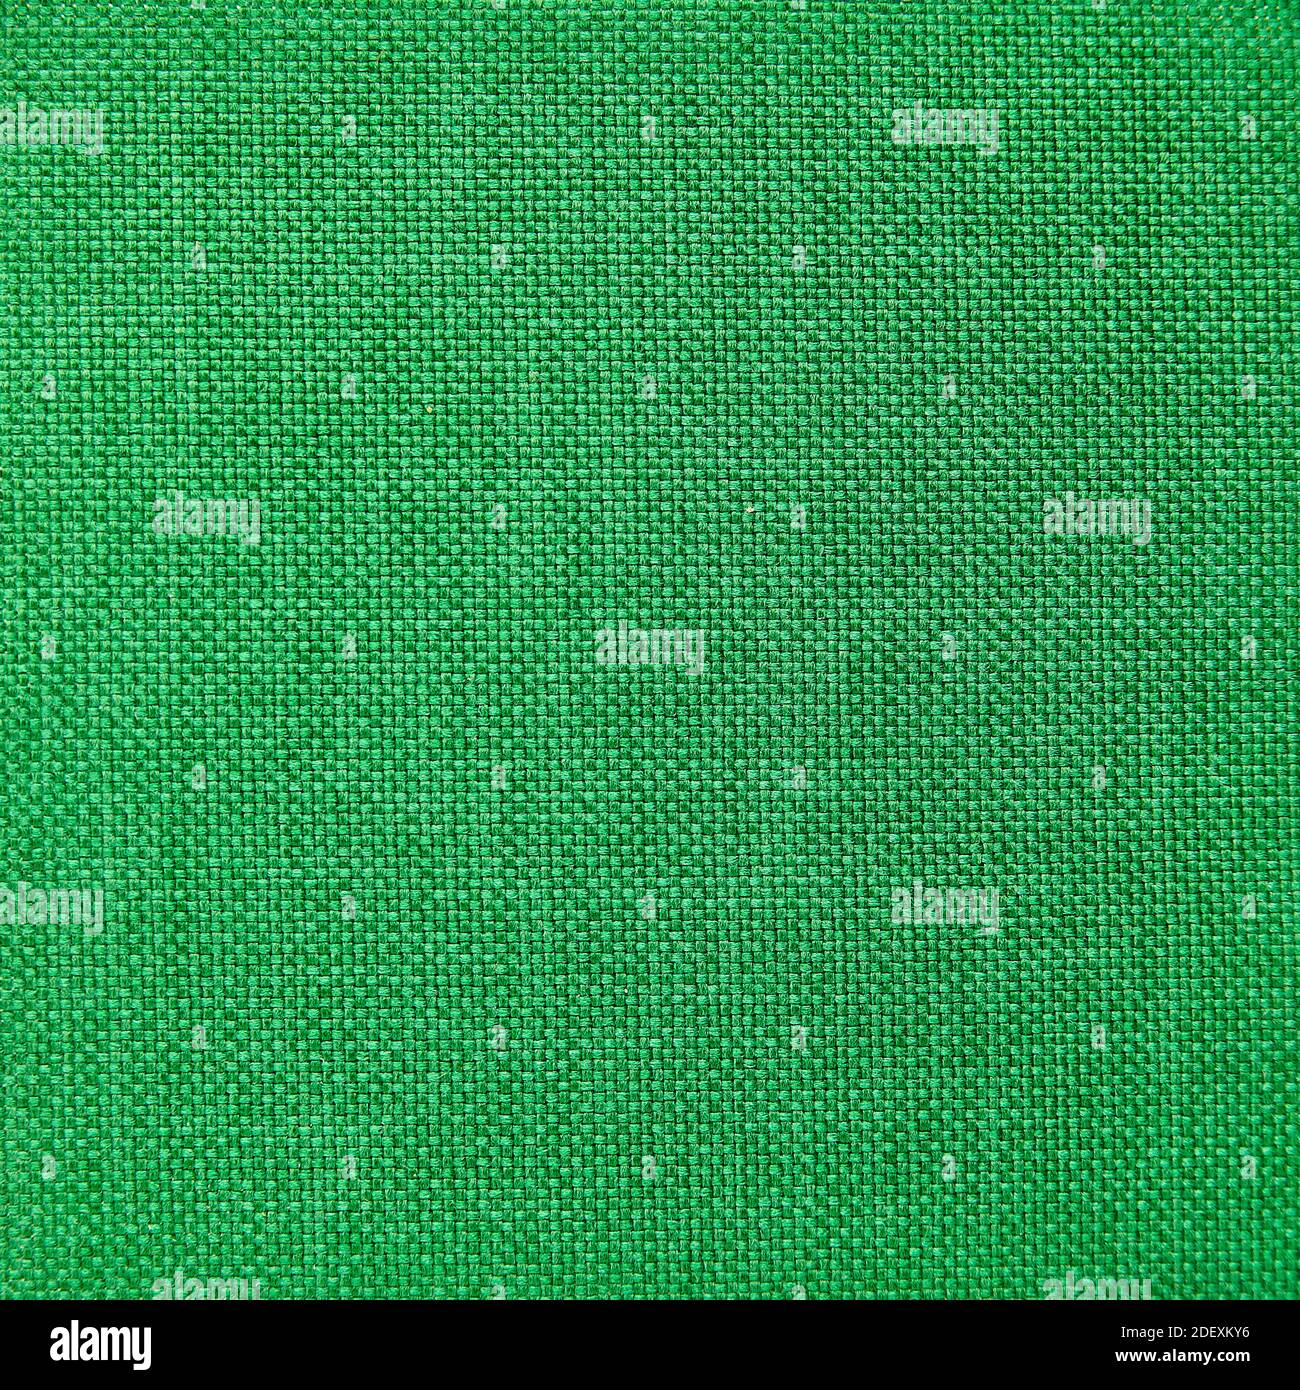 Fabric texture green color for background or design Stock Photo